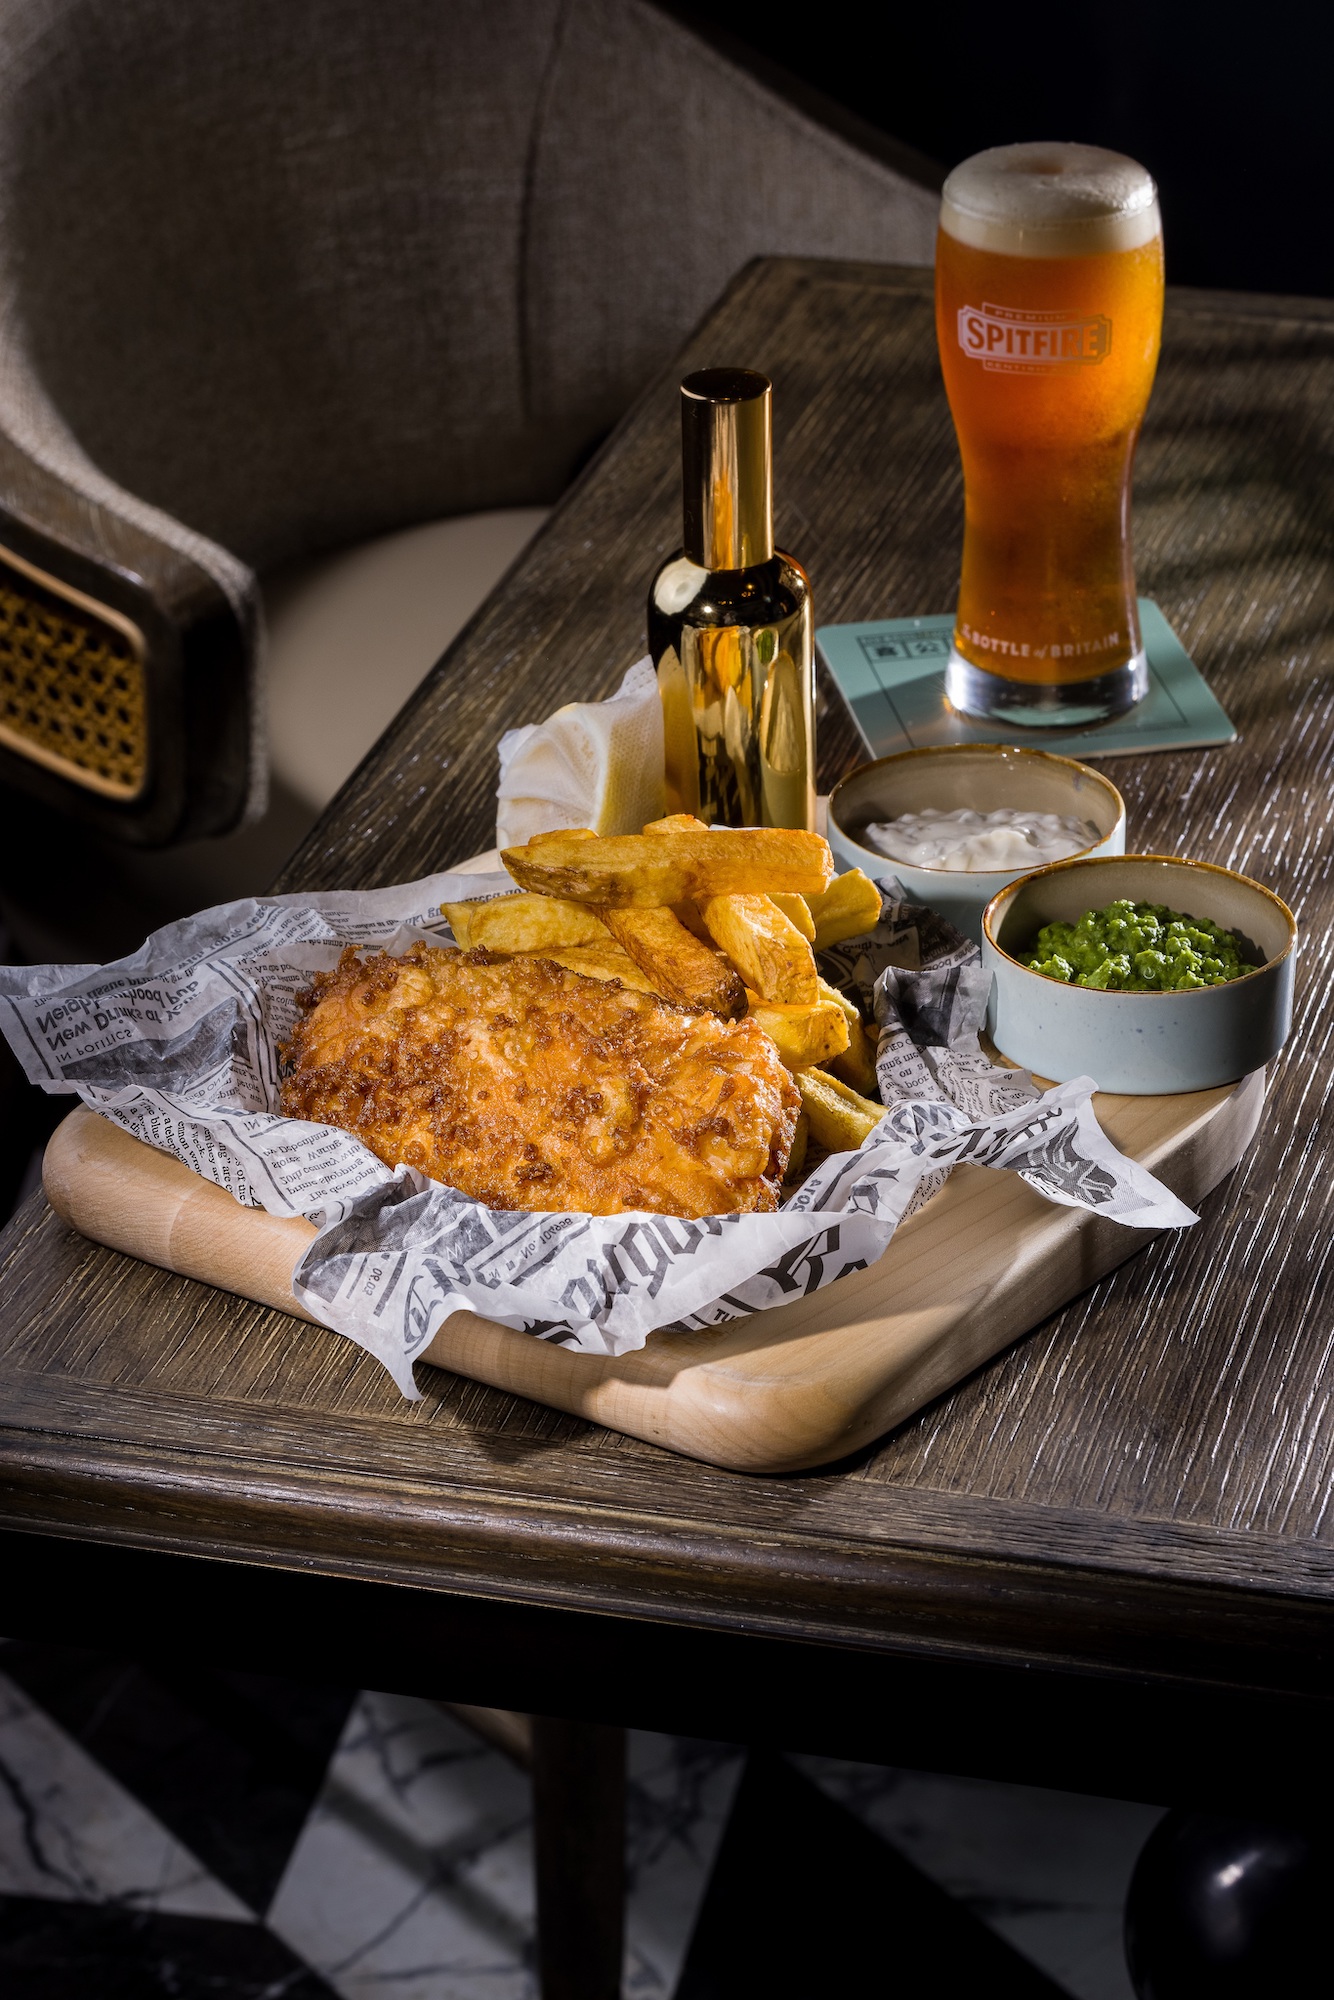 Beer battered fish and chips